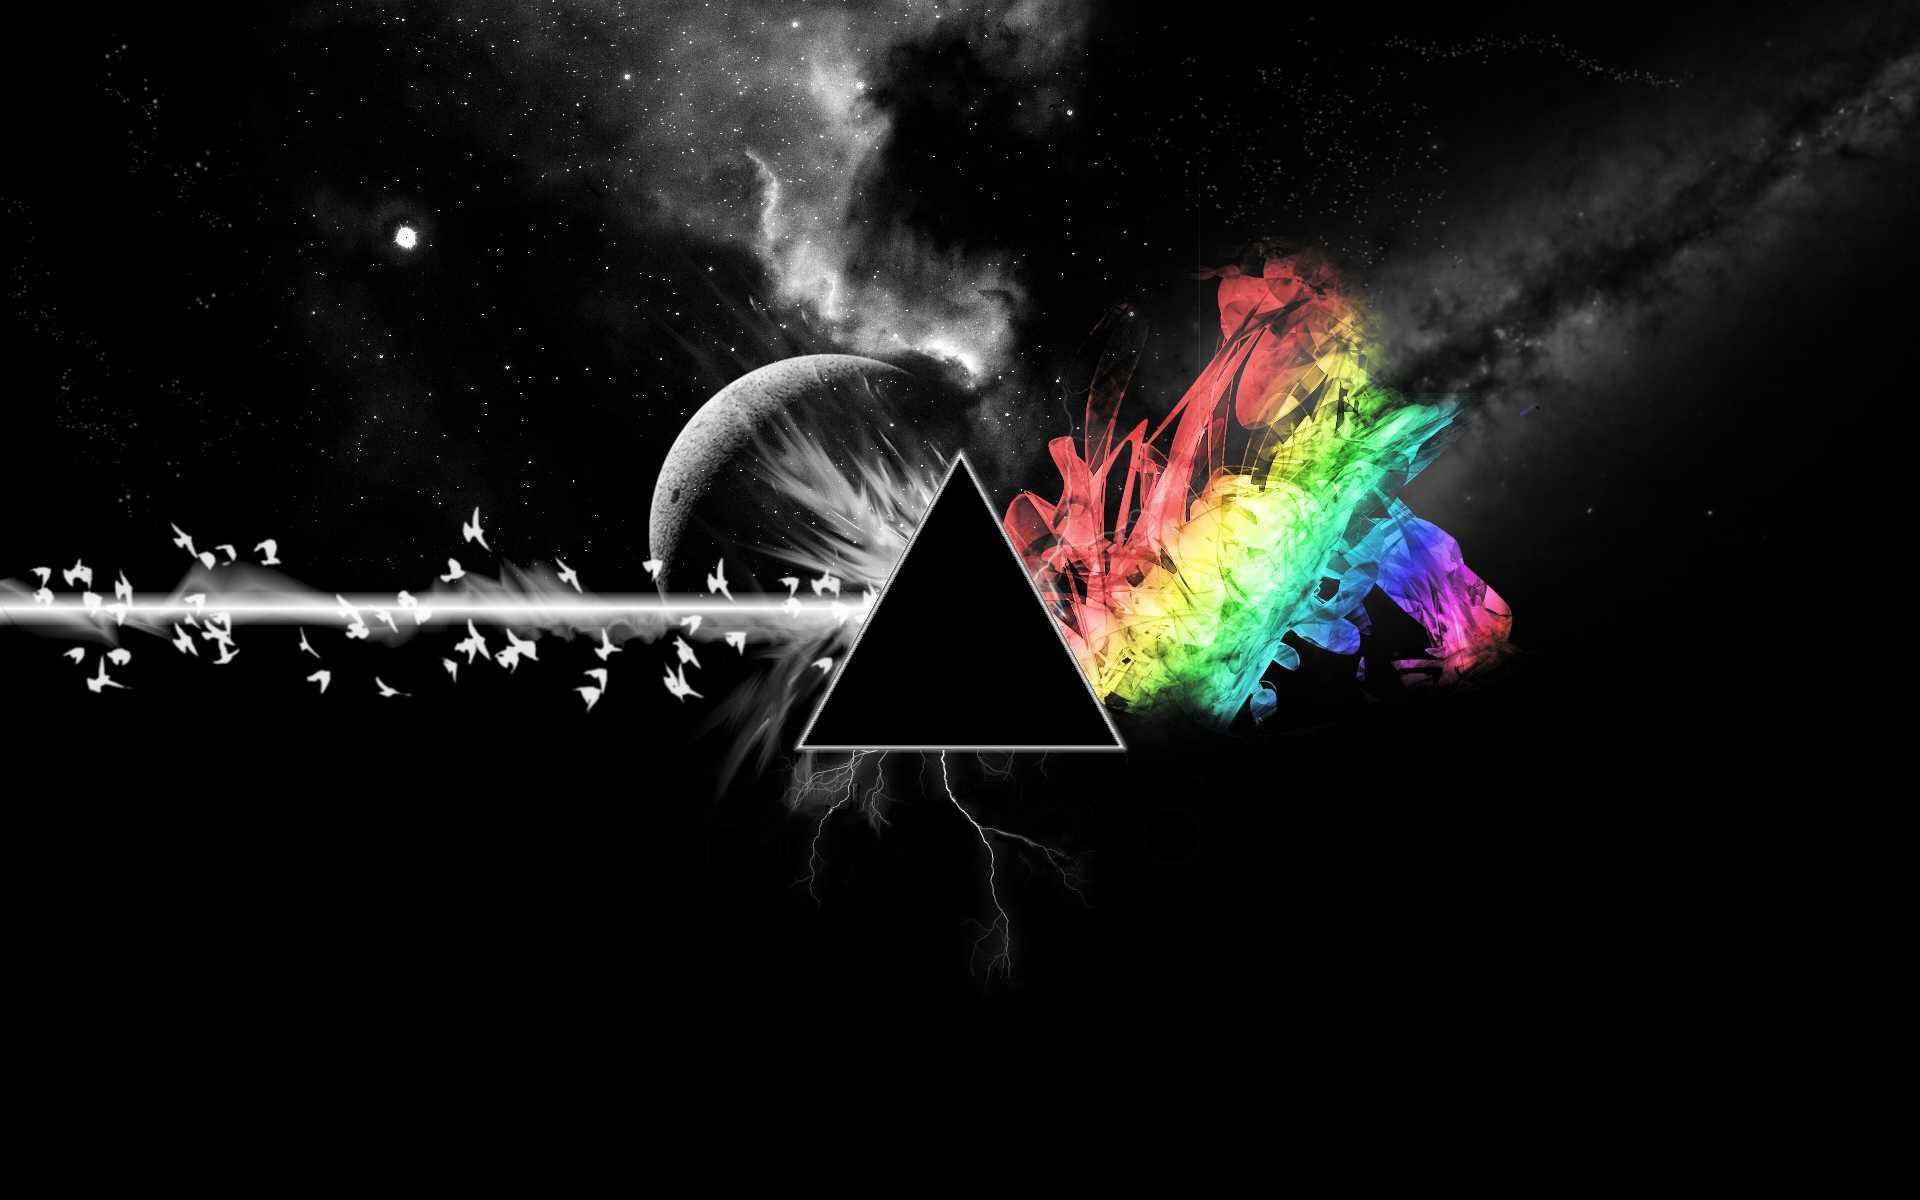 Wallpaper} This is one is for the Pink Floyd fans or budding